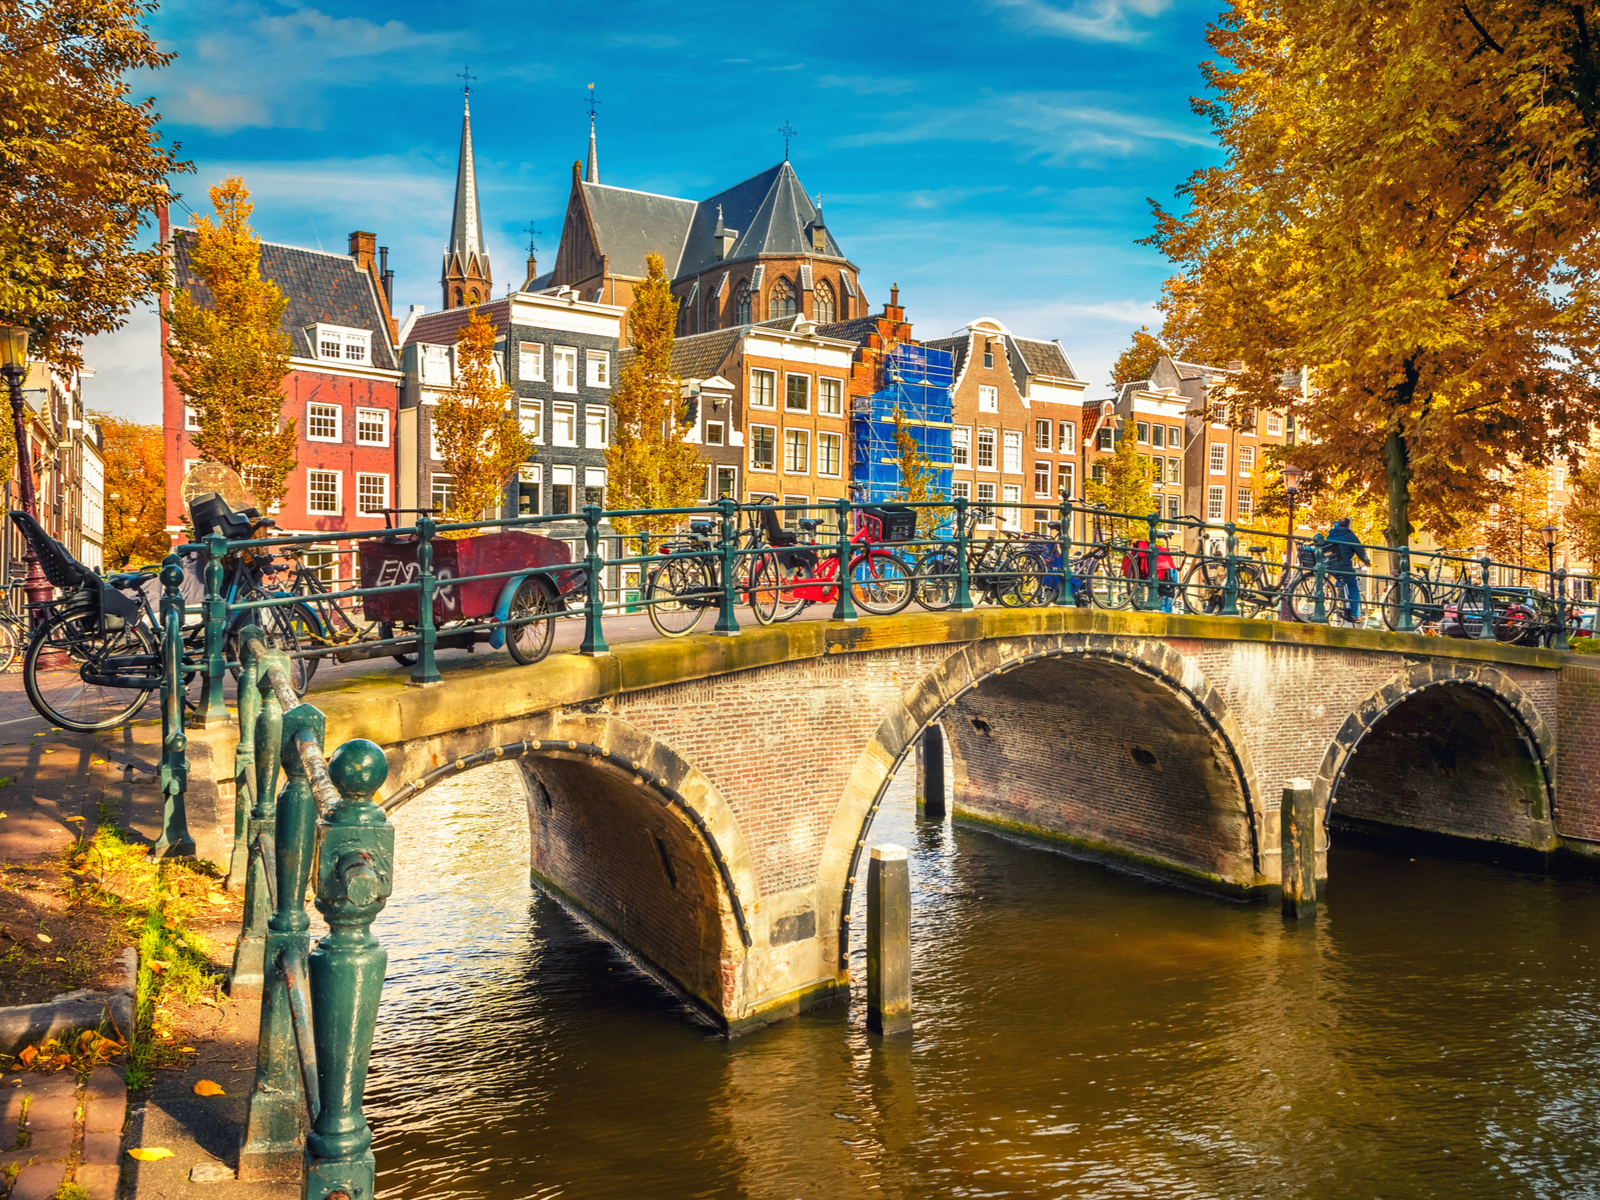 Cool bridges over a canal in Autumn, one of the best times to visit Amsterdam